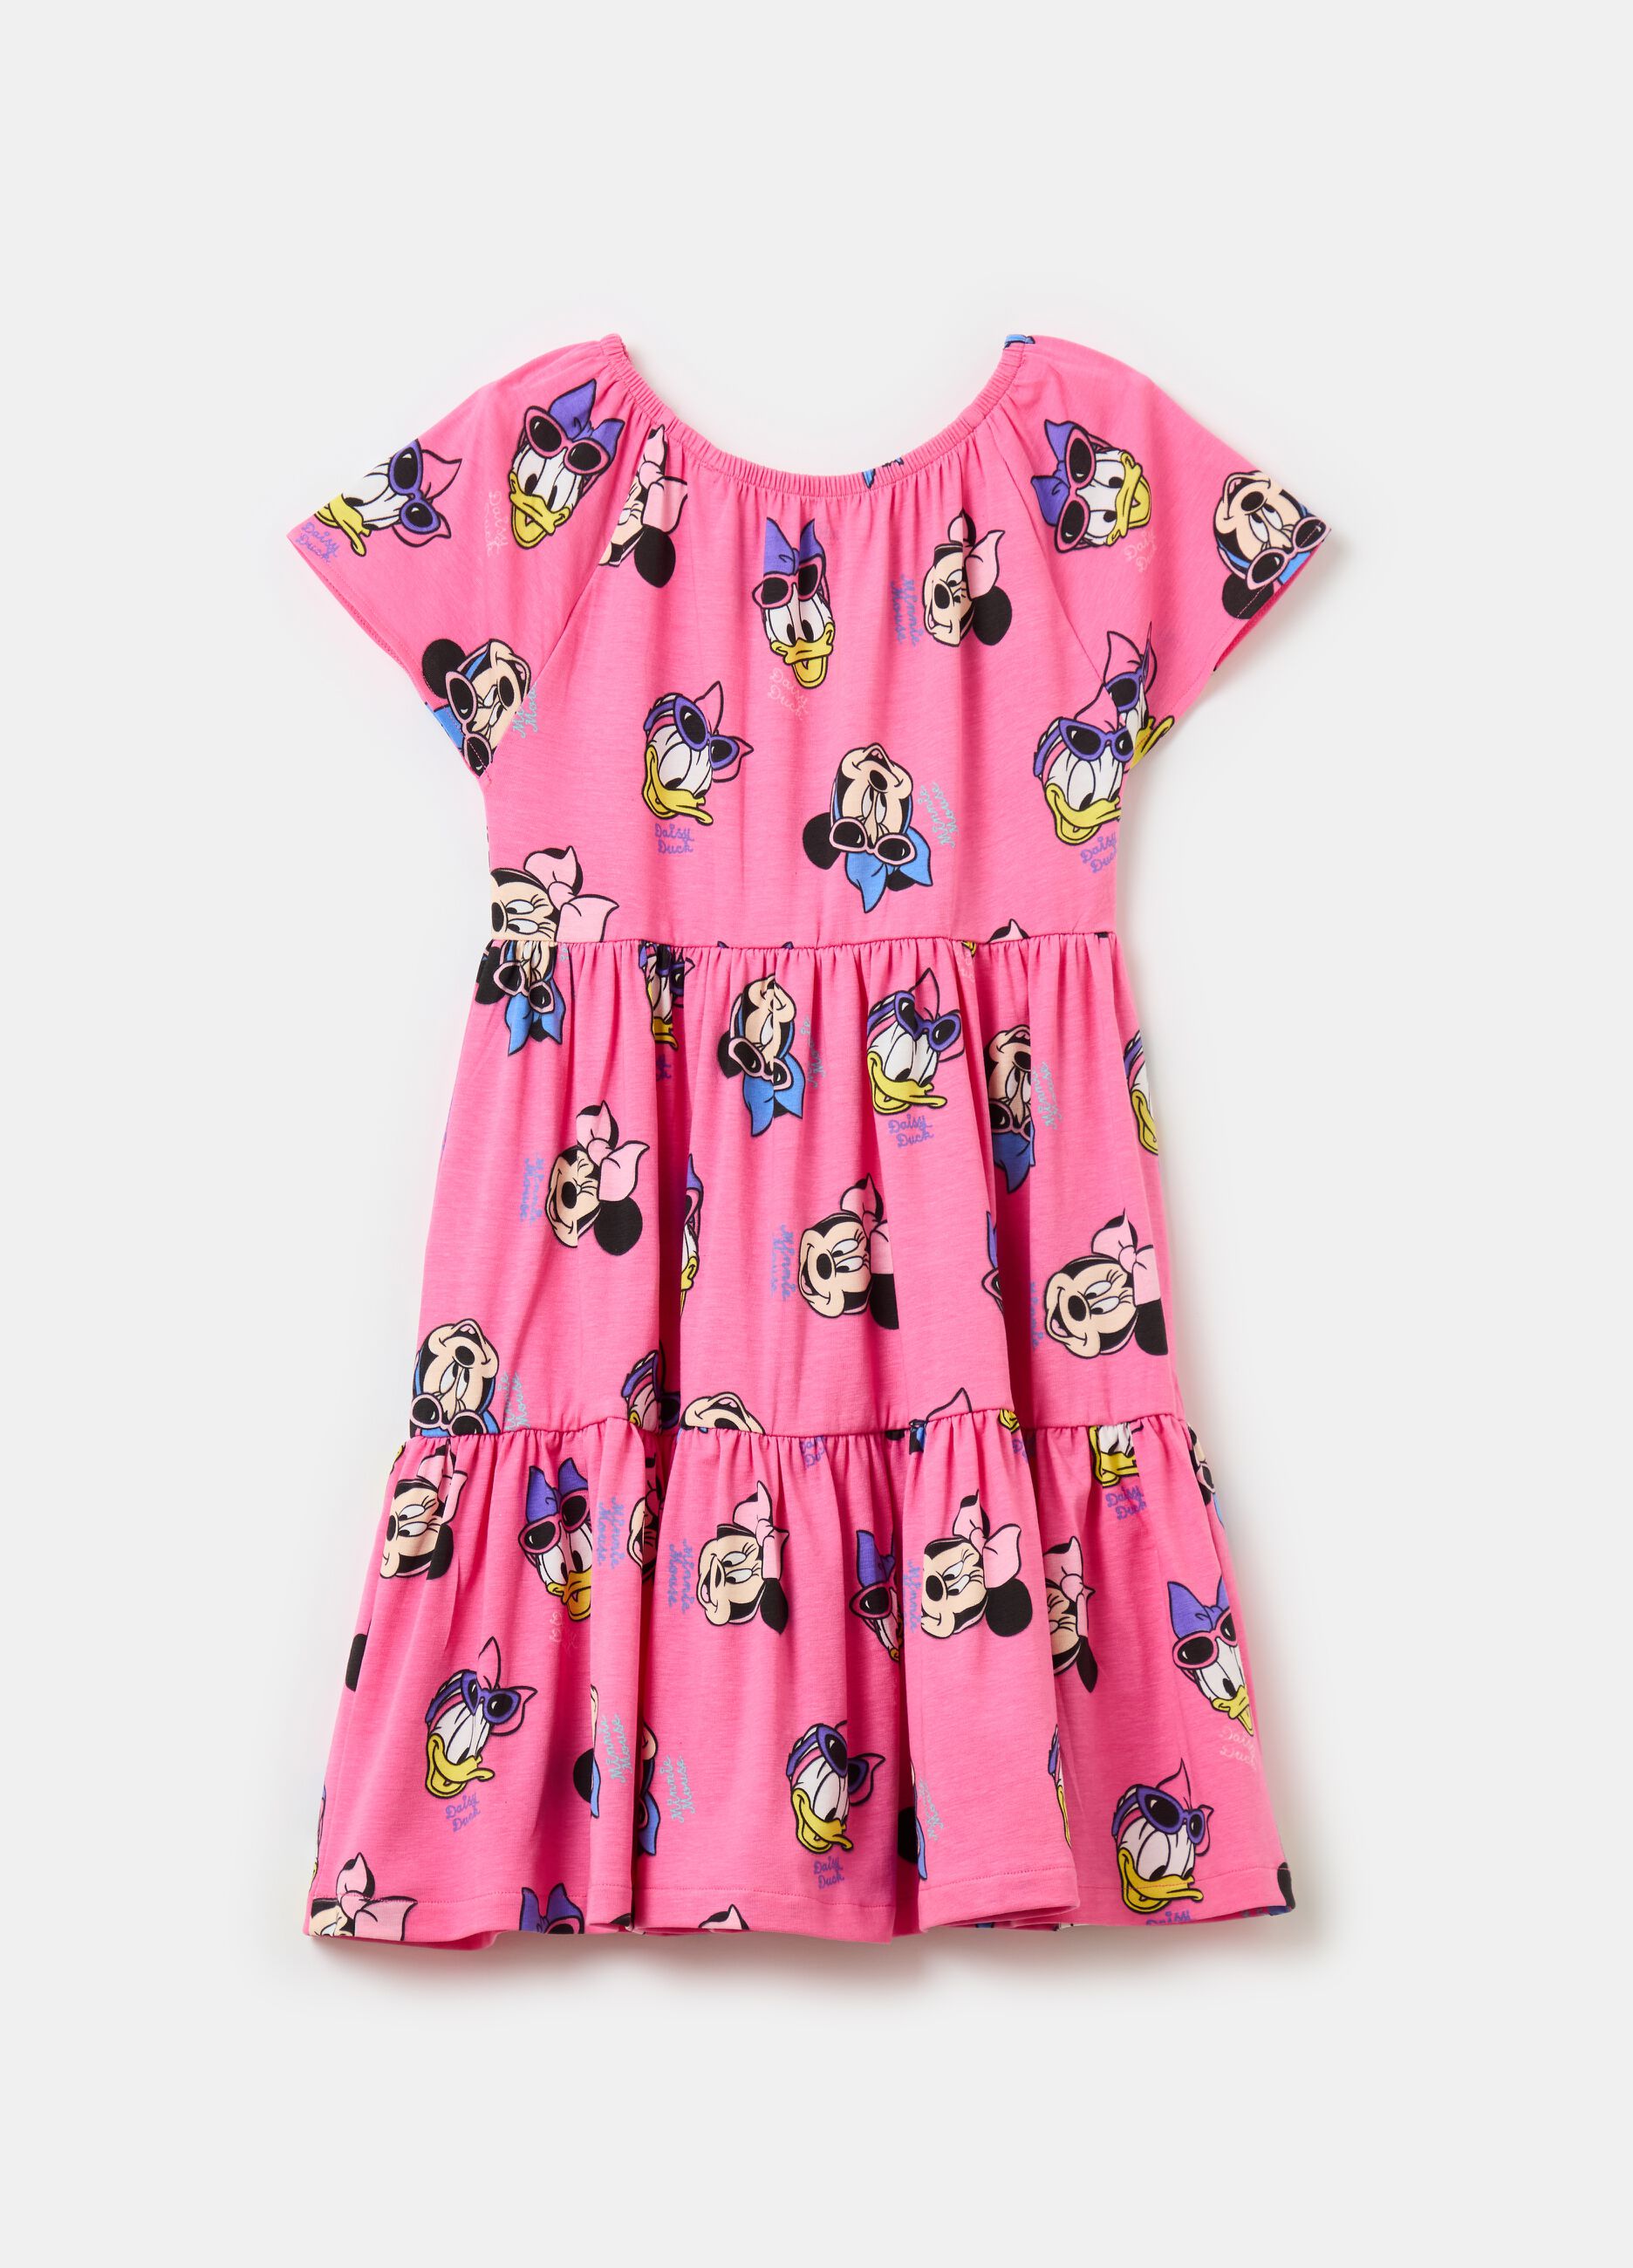 Tiered dress with Minnie Mouse and Daisy Duck print